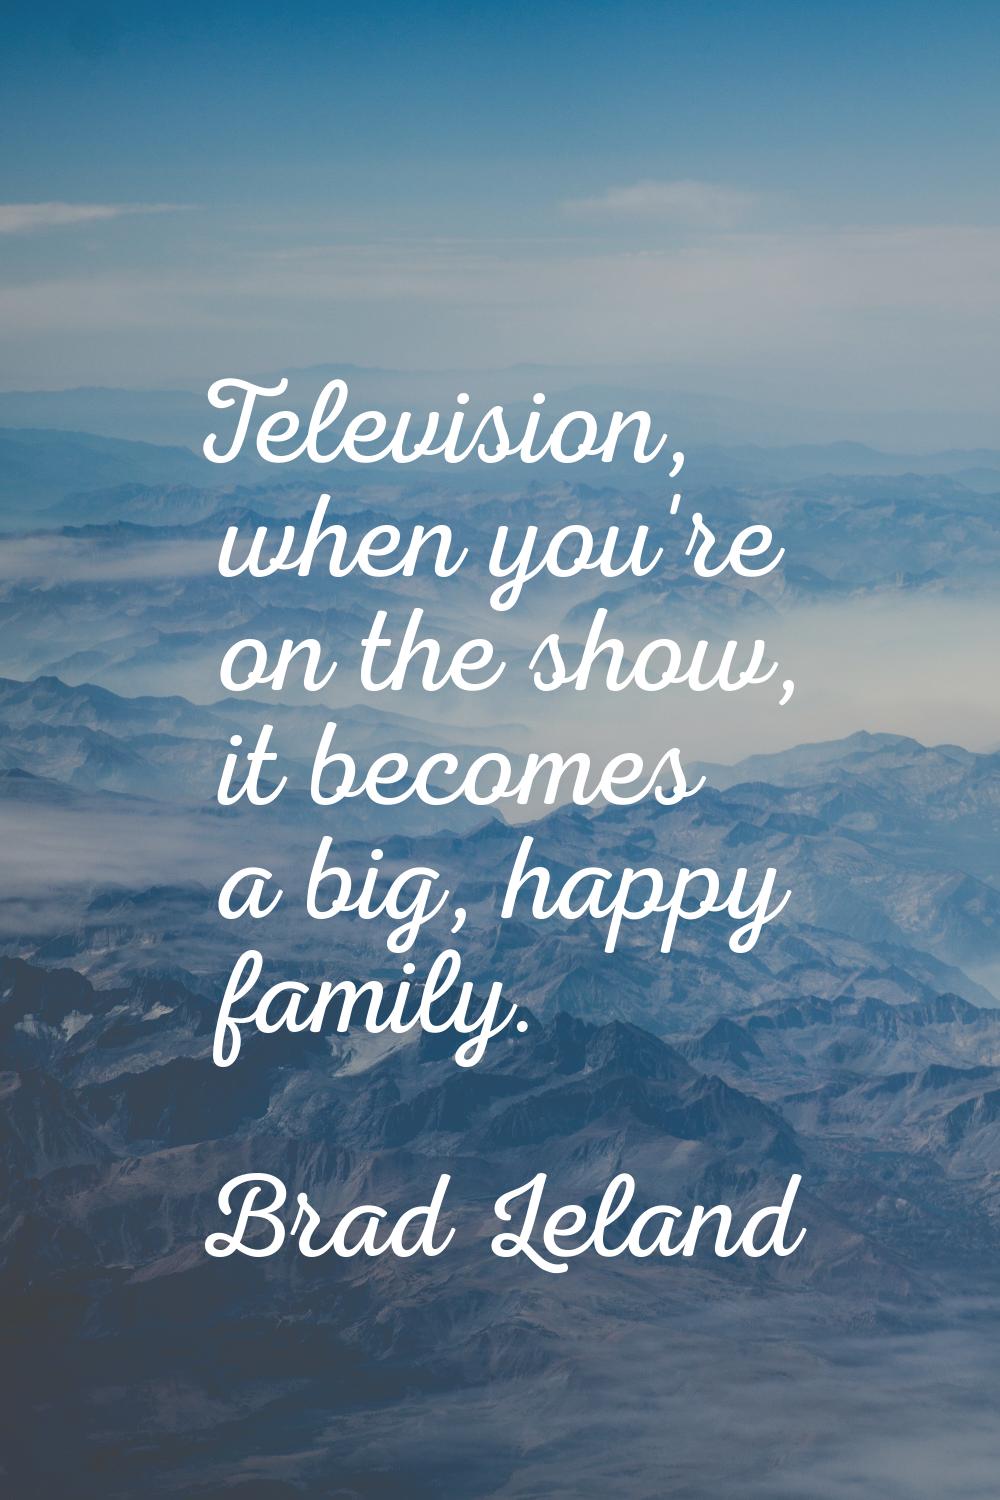 Television, when you're on the show, it becomes a big, happy family.